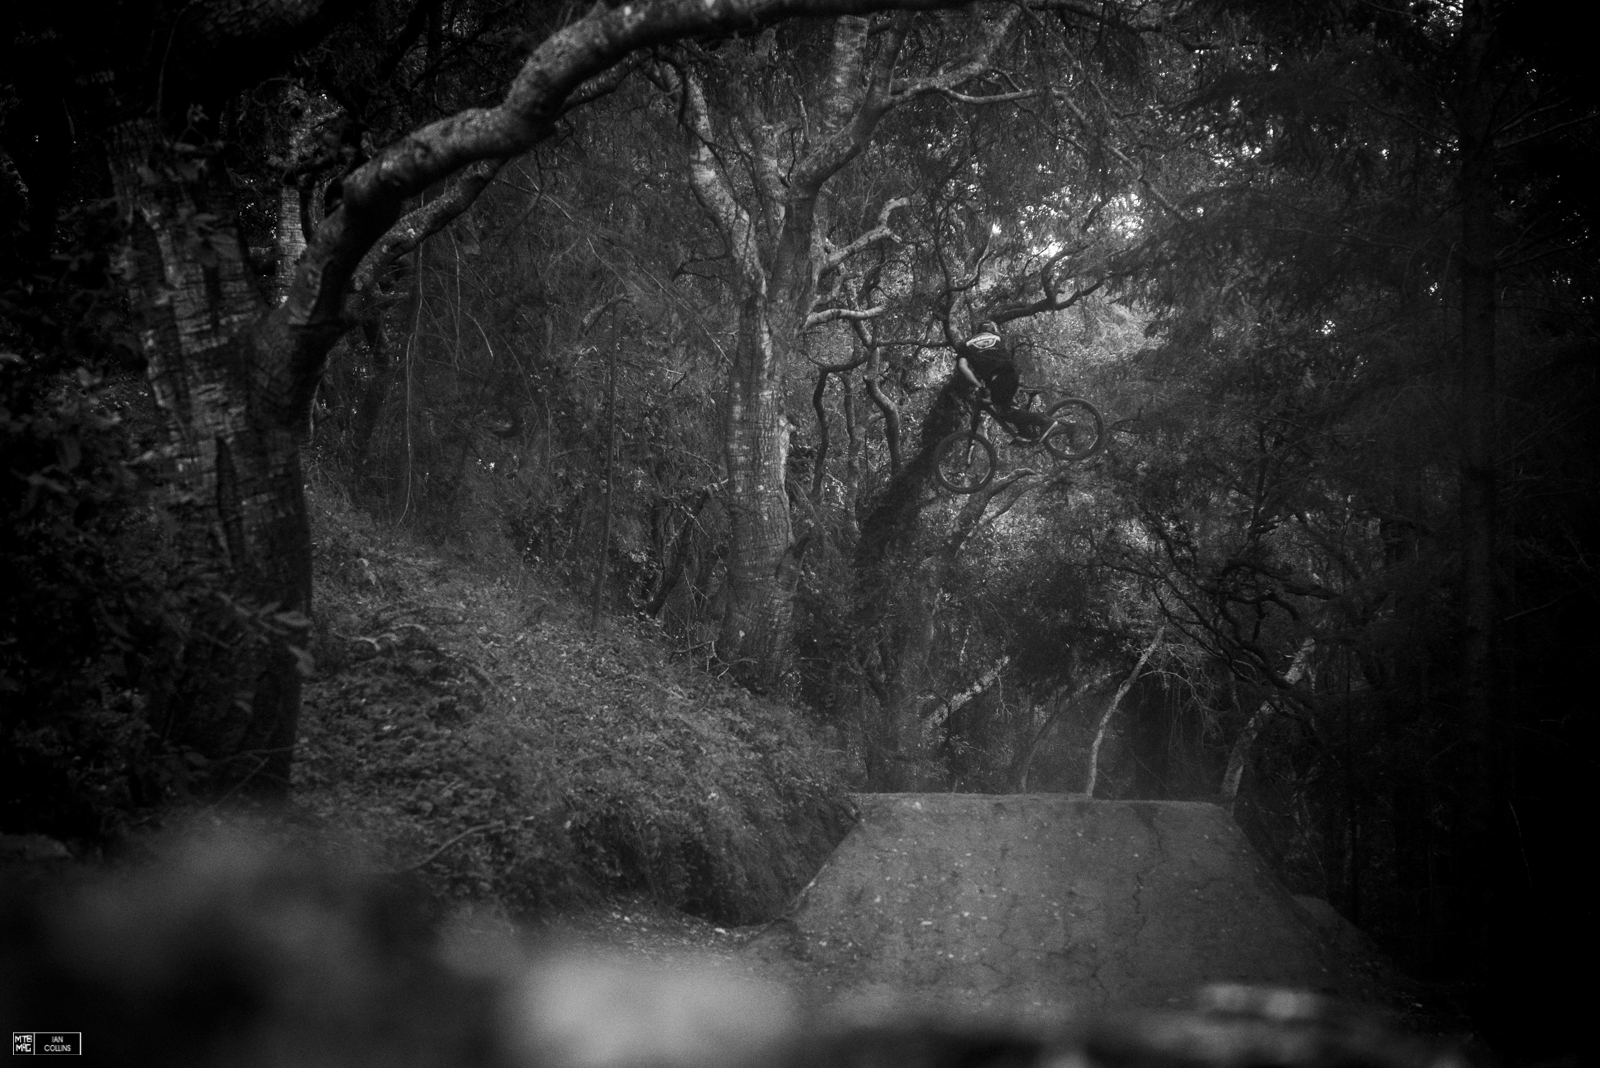 Brandon whipping into an endless tunnel of gnarled trees.